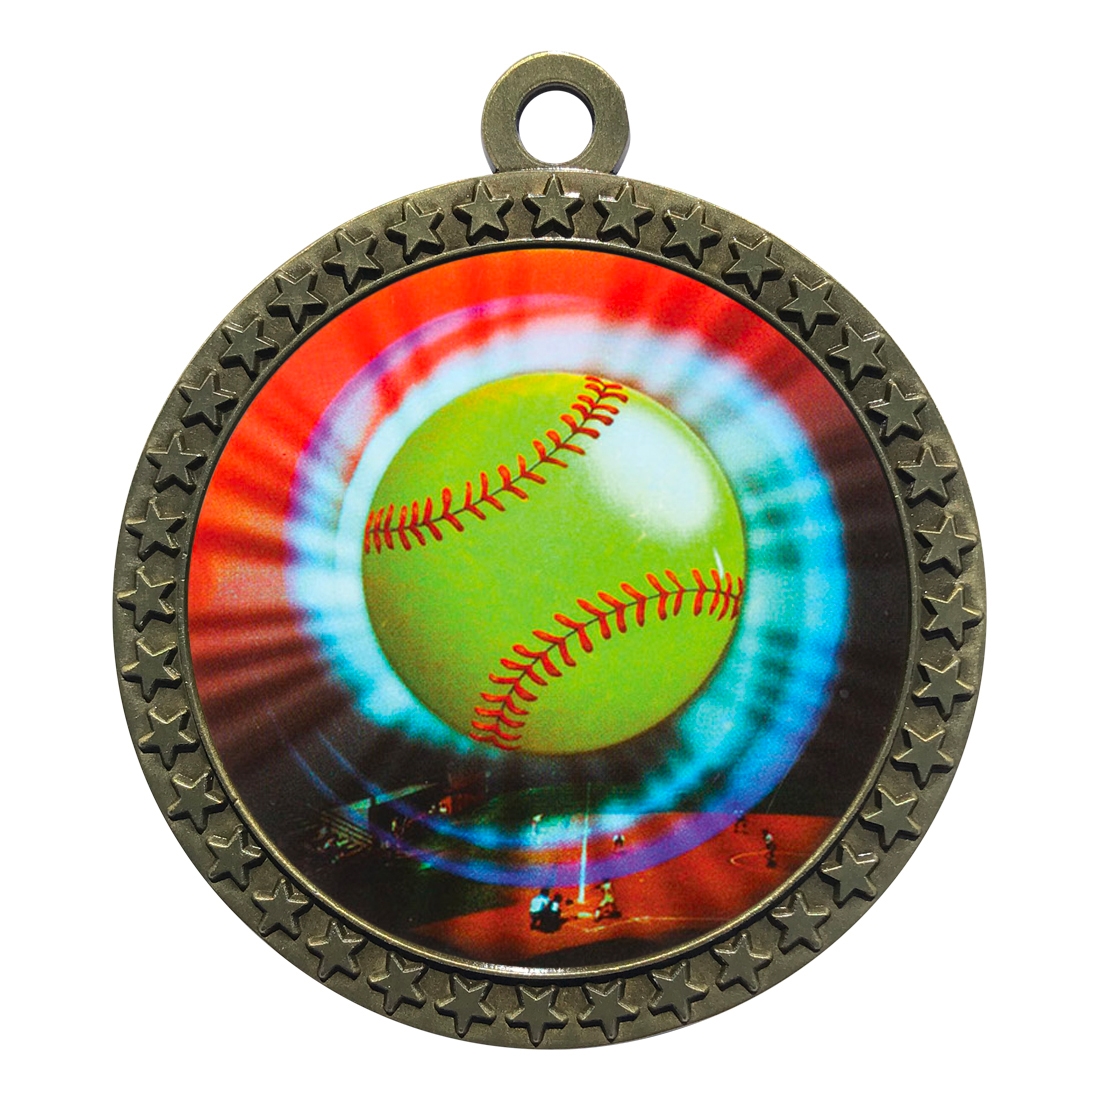 Express Medals 1 to 50 Packs Flame Softball Gold Medal Trophy Award with Neck Ribbon STDD212-EMFCL805 